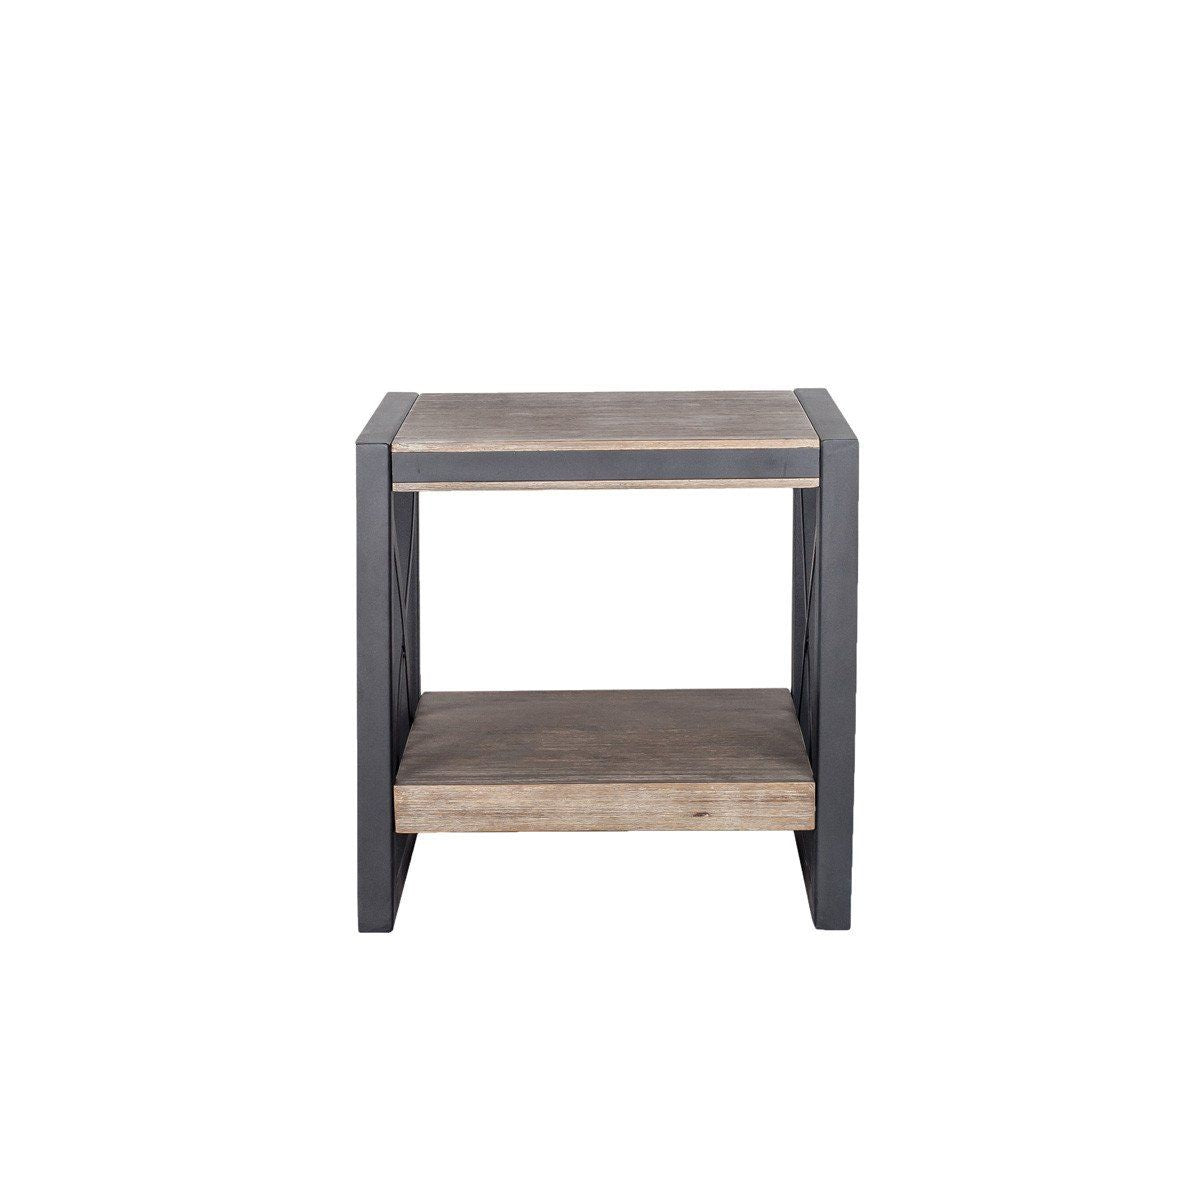 Best Price On Moe S Home Collection Vx 1008 21 Bronx Side Table